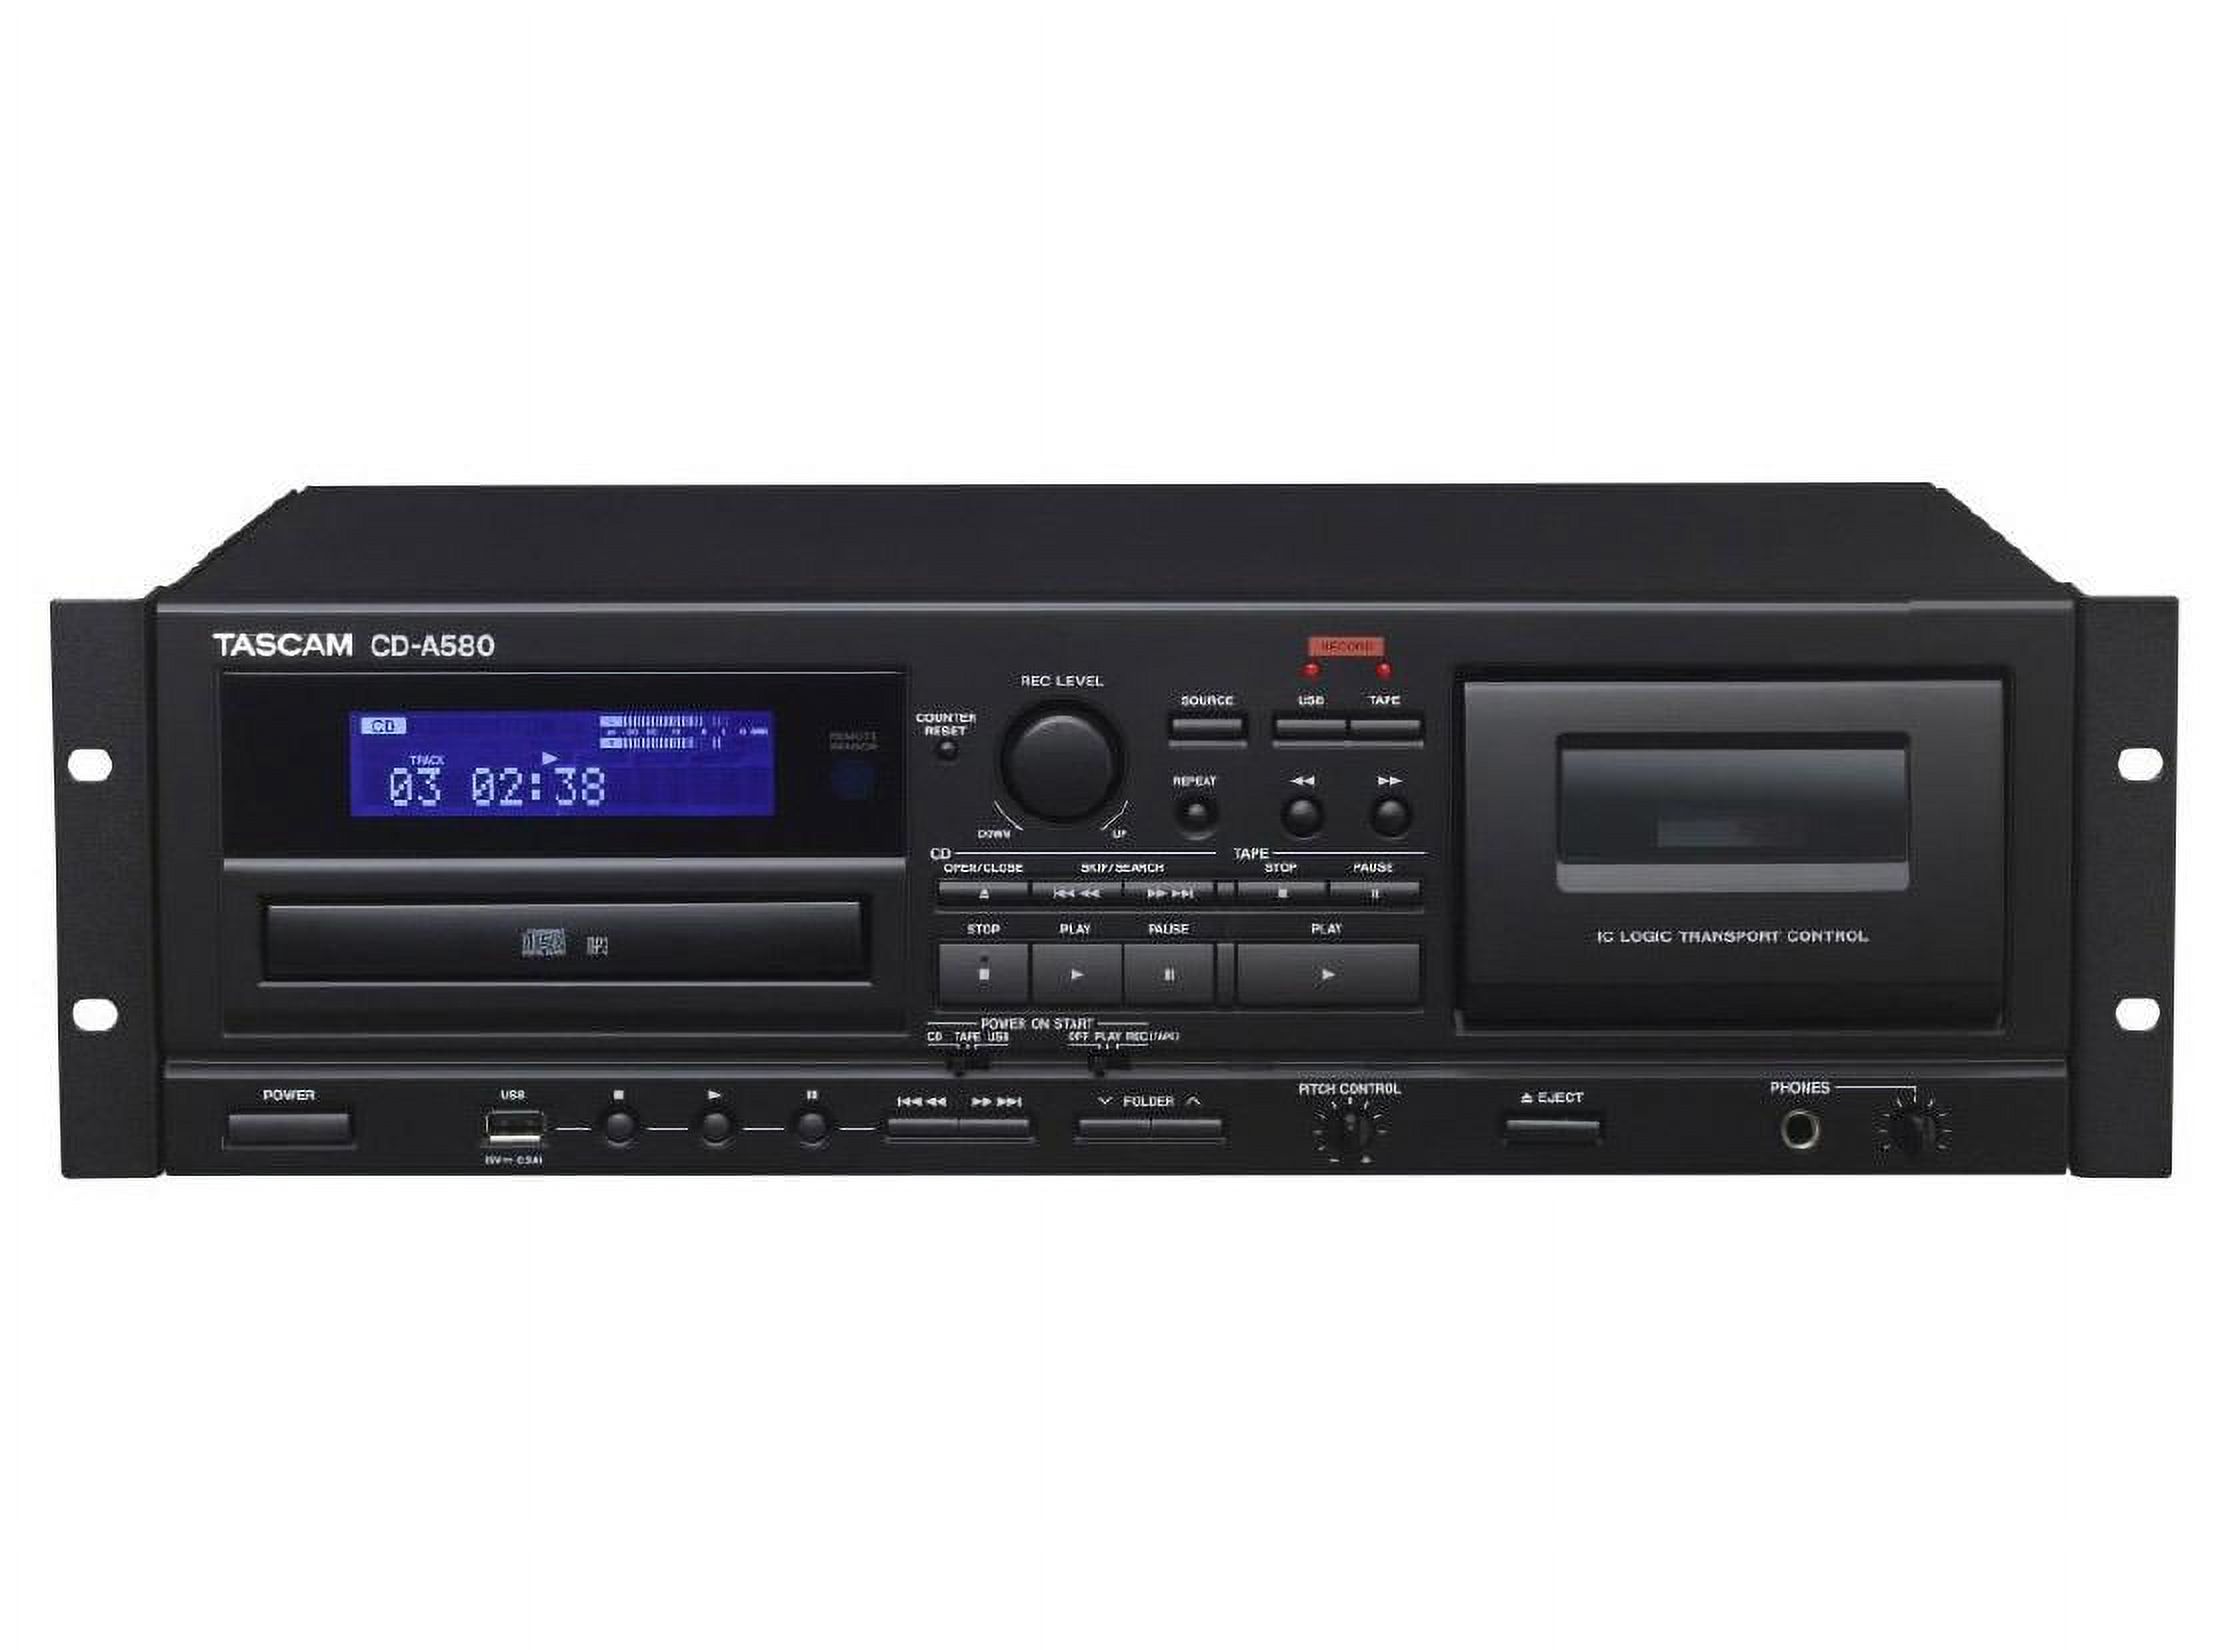 Tascam CD-A580 Cassette/CD/USB MP3 Player Recorder - image 1 of 2